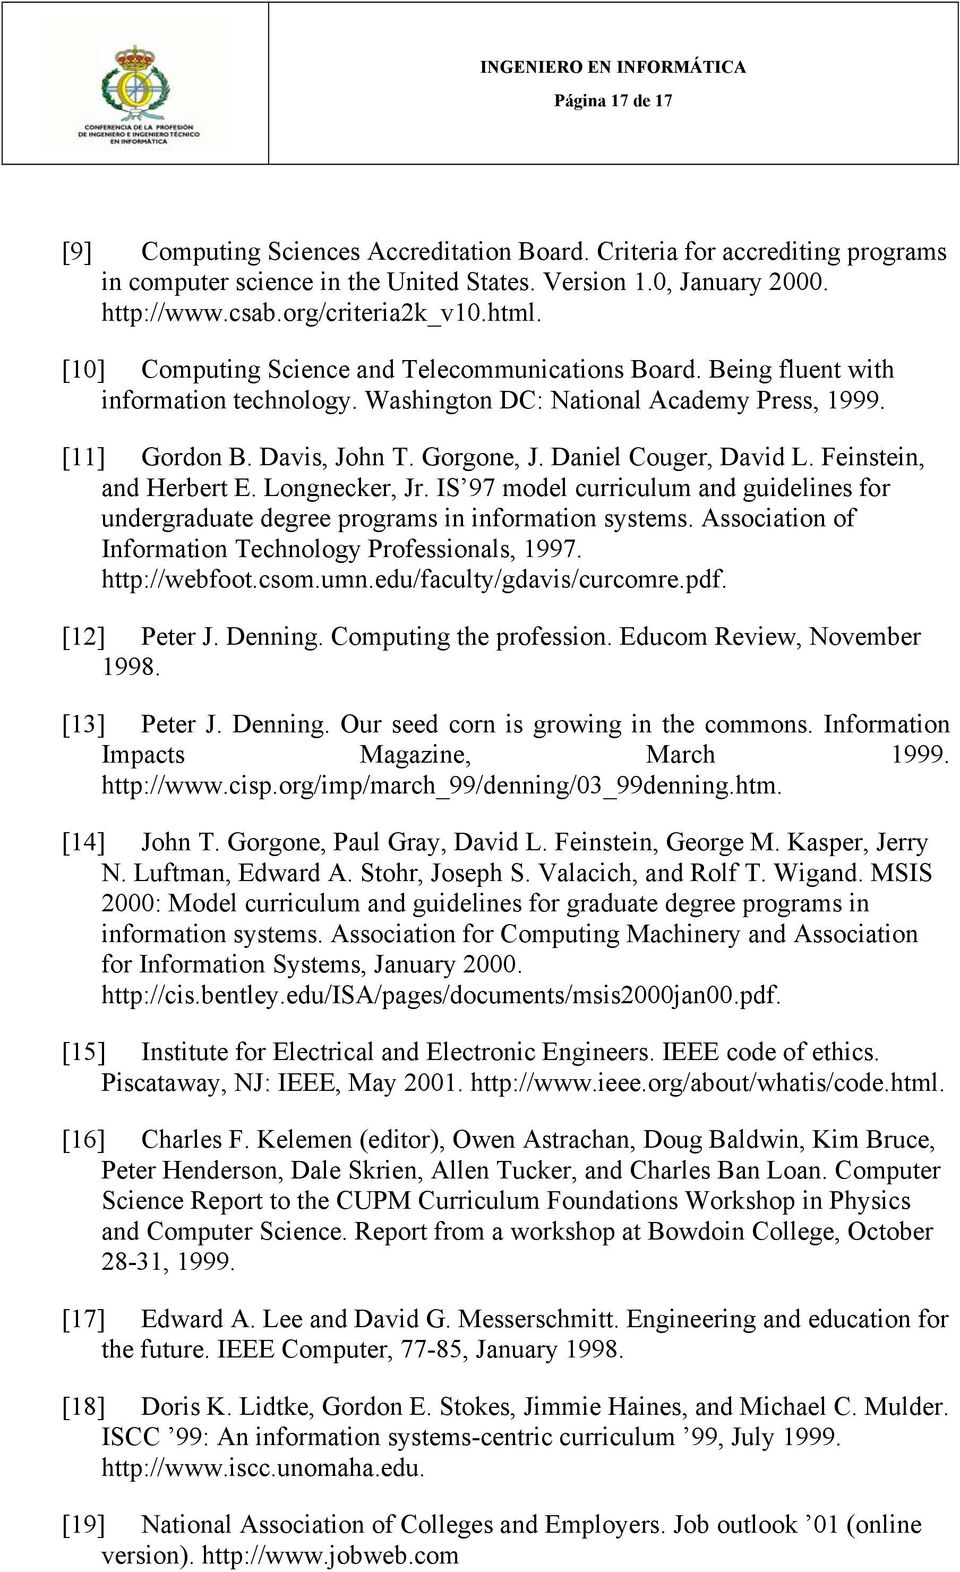 Daniel Couger, David L. Feinstein, and Herbert E. Longnecker, Jr. IS 97 model curriculum and guidelines for undergraduate degree programs in information systems.